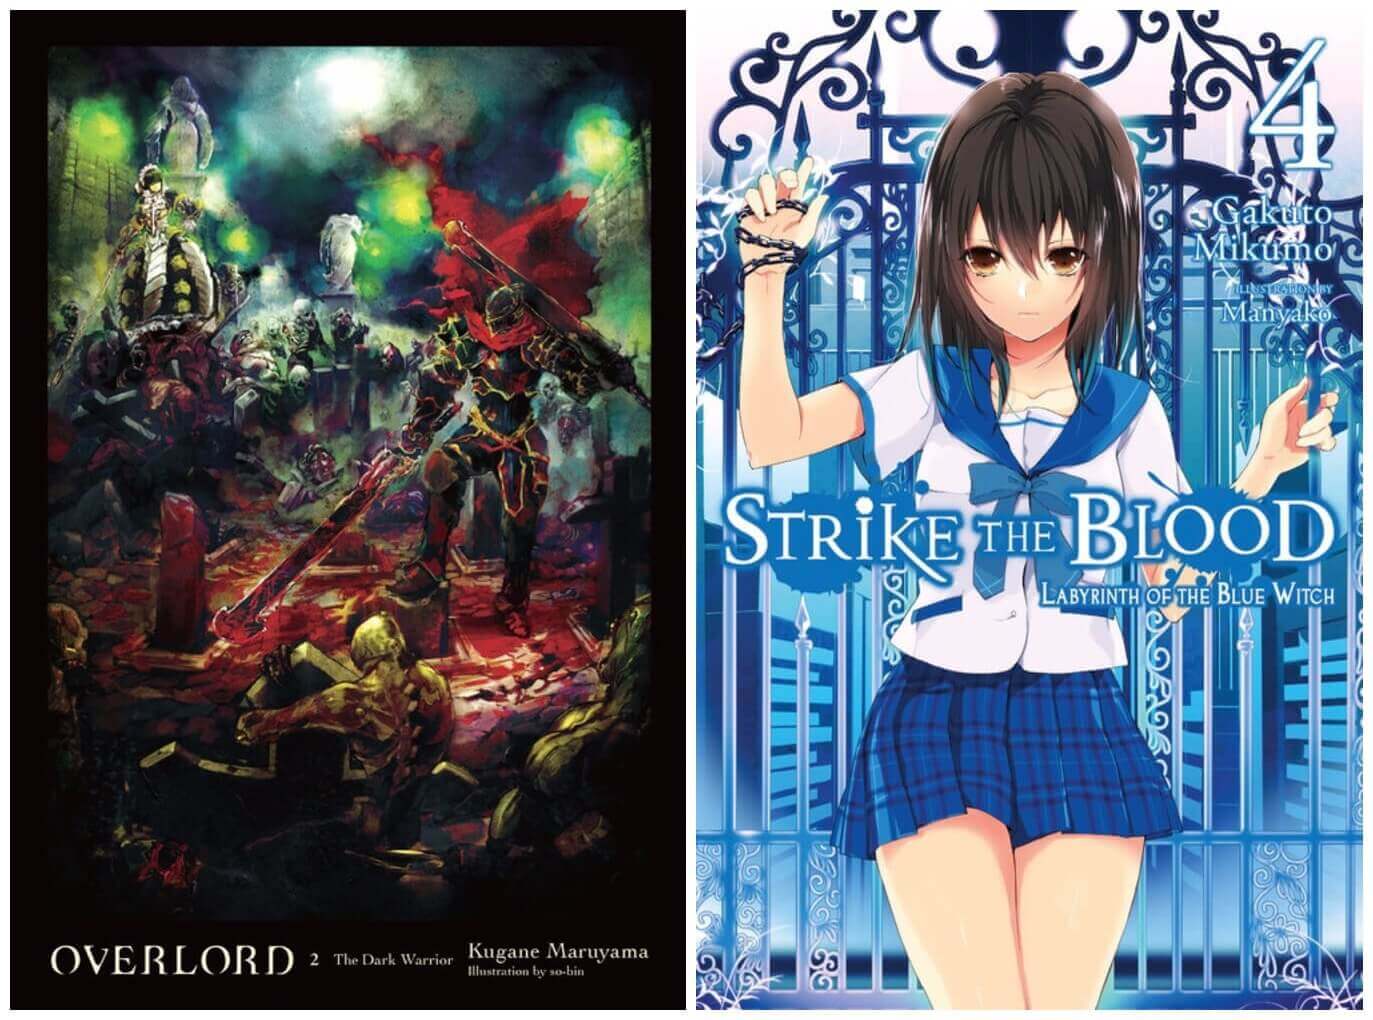 September 2016 Manga Releases Covers for Overlord and Strike the Blood.